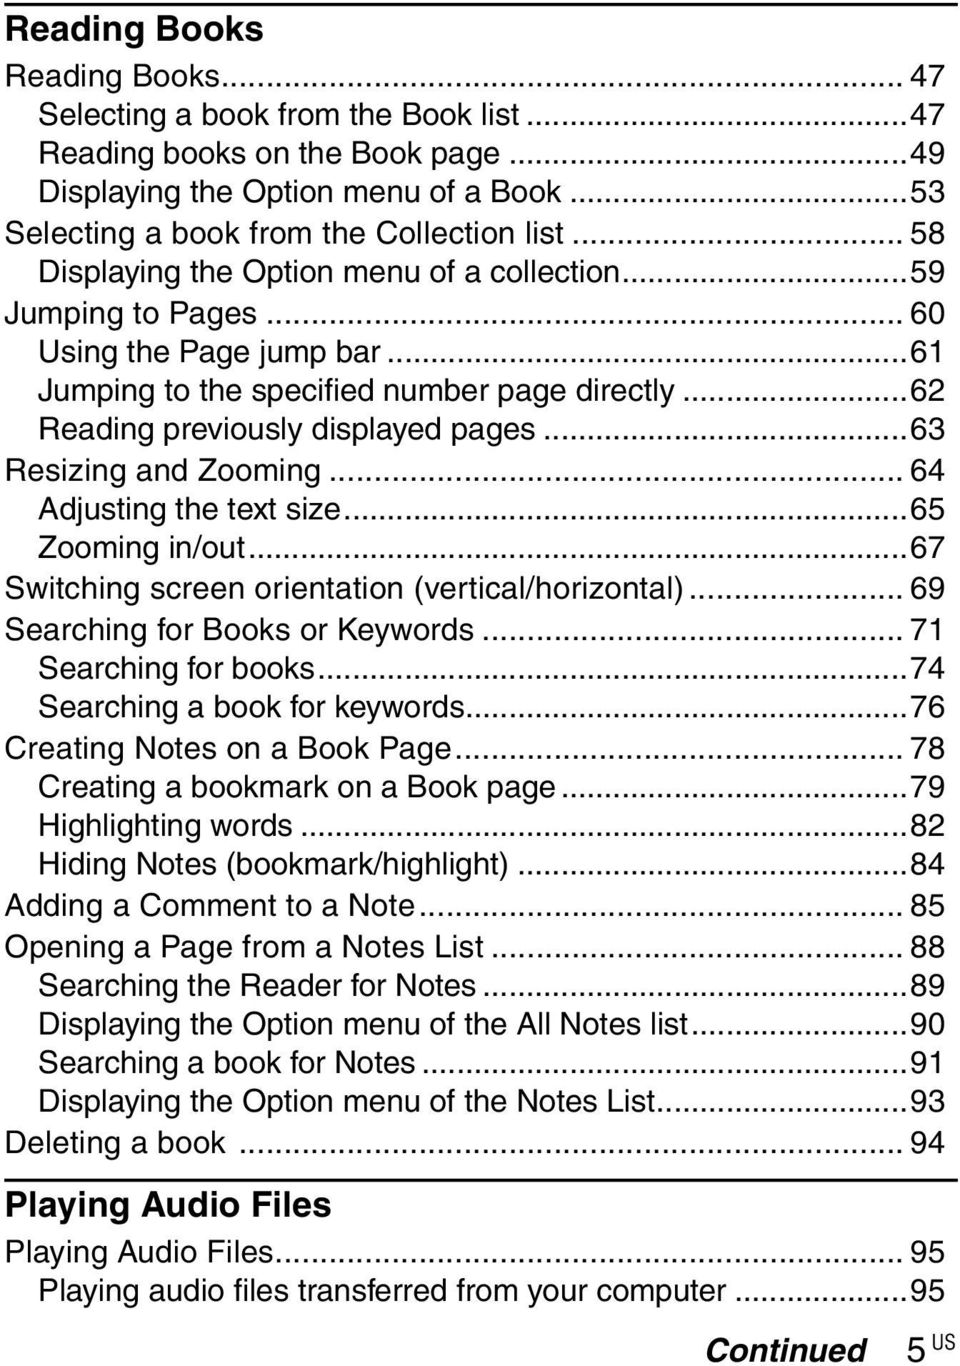 ..63 Resizing and Zooming... 64 Adjusting the text size...65 Zooming in/out...67 Switching screen orientation (vertical/horizontal)... 69 Searching for Books or Keywords... 71 Searching for books.